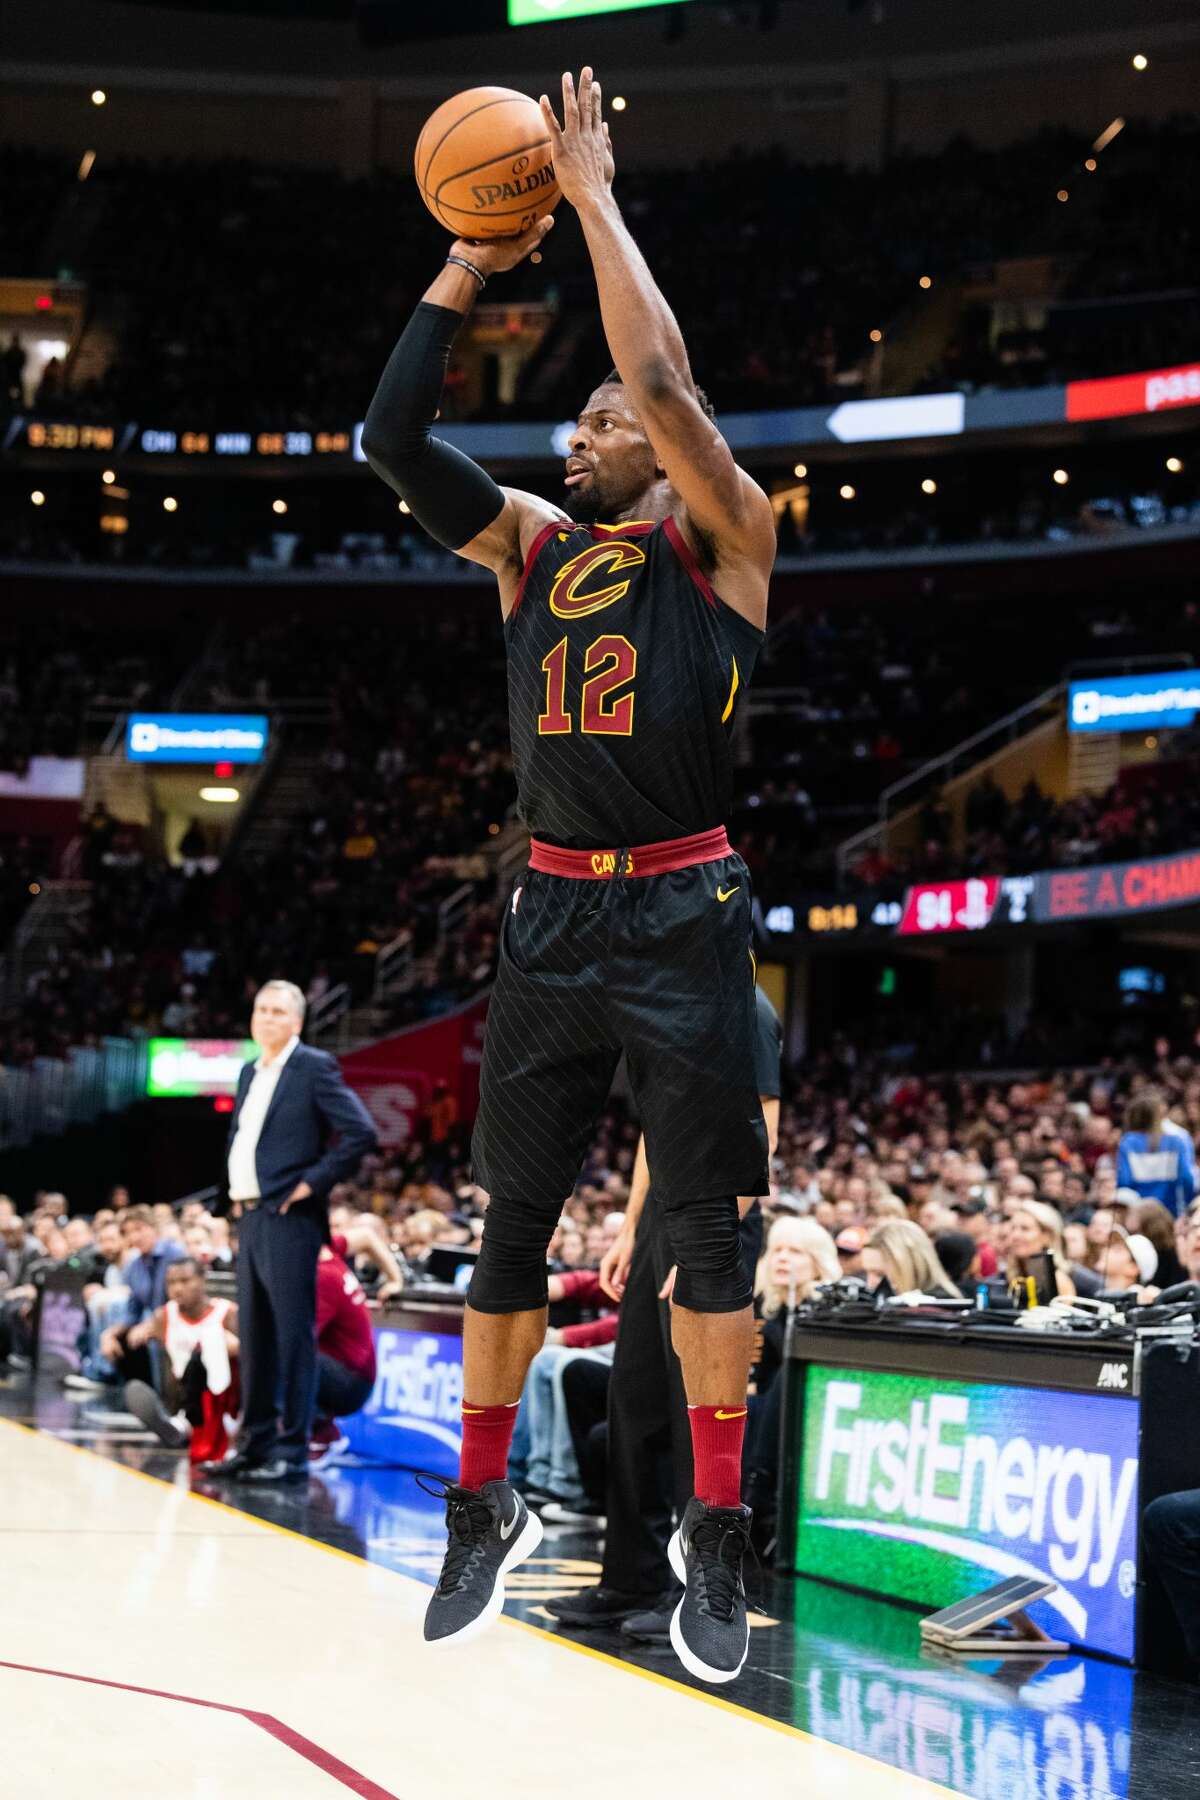 CLEVELAND, OH - NOVEMBER 24: David Nwaba #12 of the Cleveland Cavaliers shoots during the second half against the Houston Rockets at Quicken Loans Arena on November 24, 2018 in Cleveland, Ohio. The Cavaliers defeated the Rockets 117-108. NOTE TO USER: User expressly acknowledges and agrees that, by downloading and/or using this photograph, user is consenting to the terms and conditions of the Getty Images License Agreement. (Photo by Jason Miller/Getty Images)